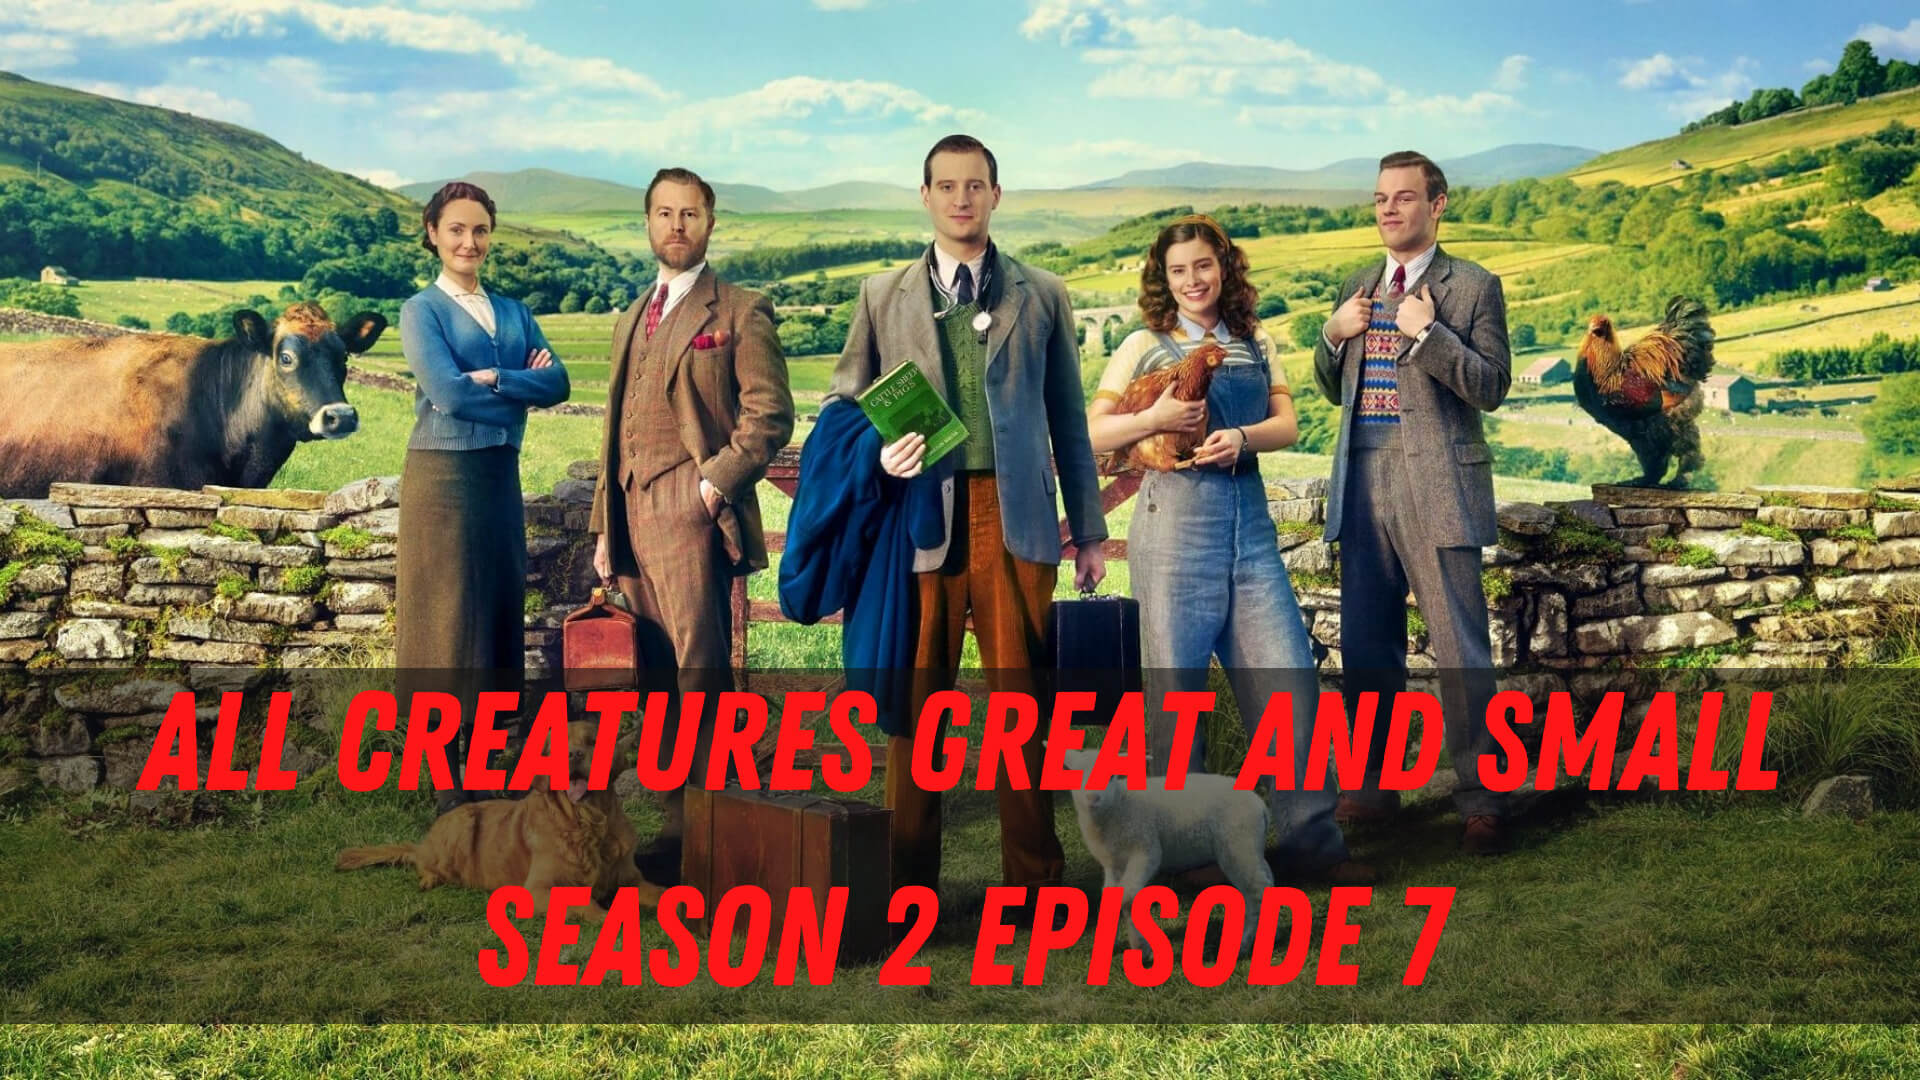 All Creatures Great and Small season 2